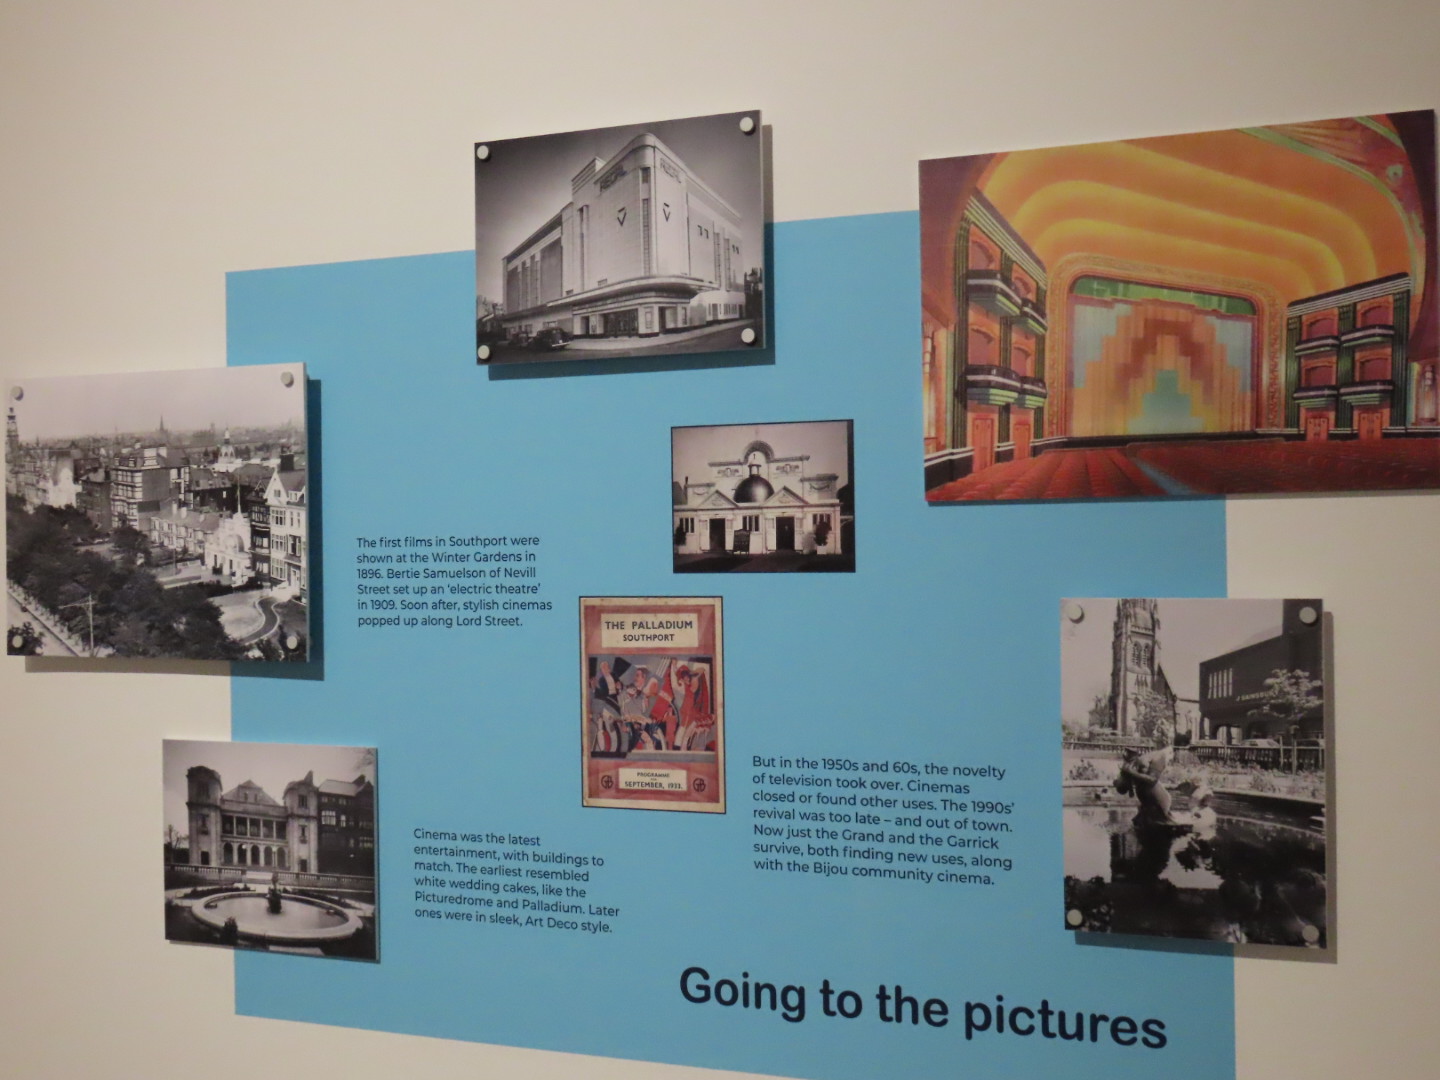 The exhibition Built on Sand 200 years of Southport's changing street scene is at The Atkinson on Lord Street in Southport from Saturday, June 18th 2022 to September 2022